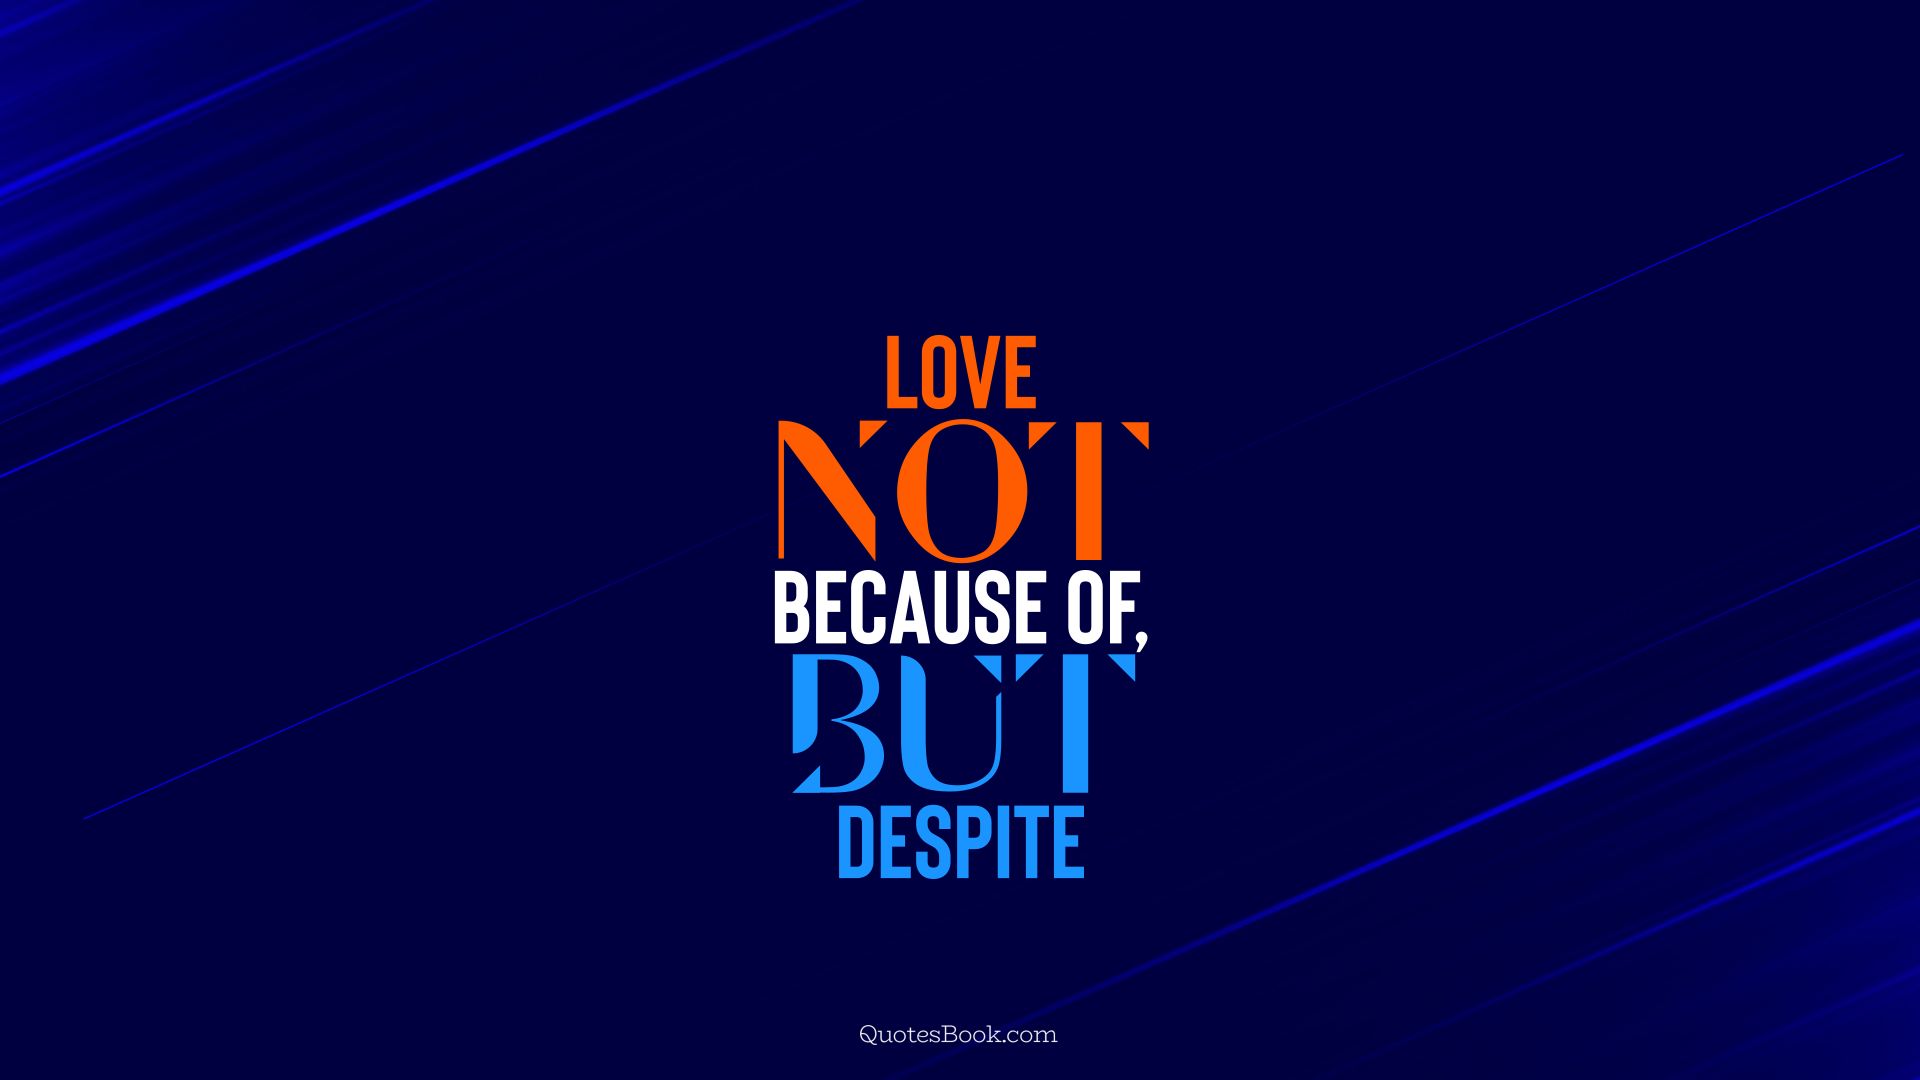 Love not because of, but despite. - Quote by QuotesBook